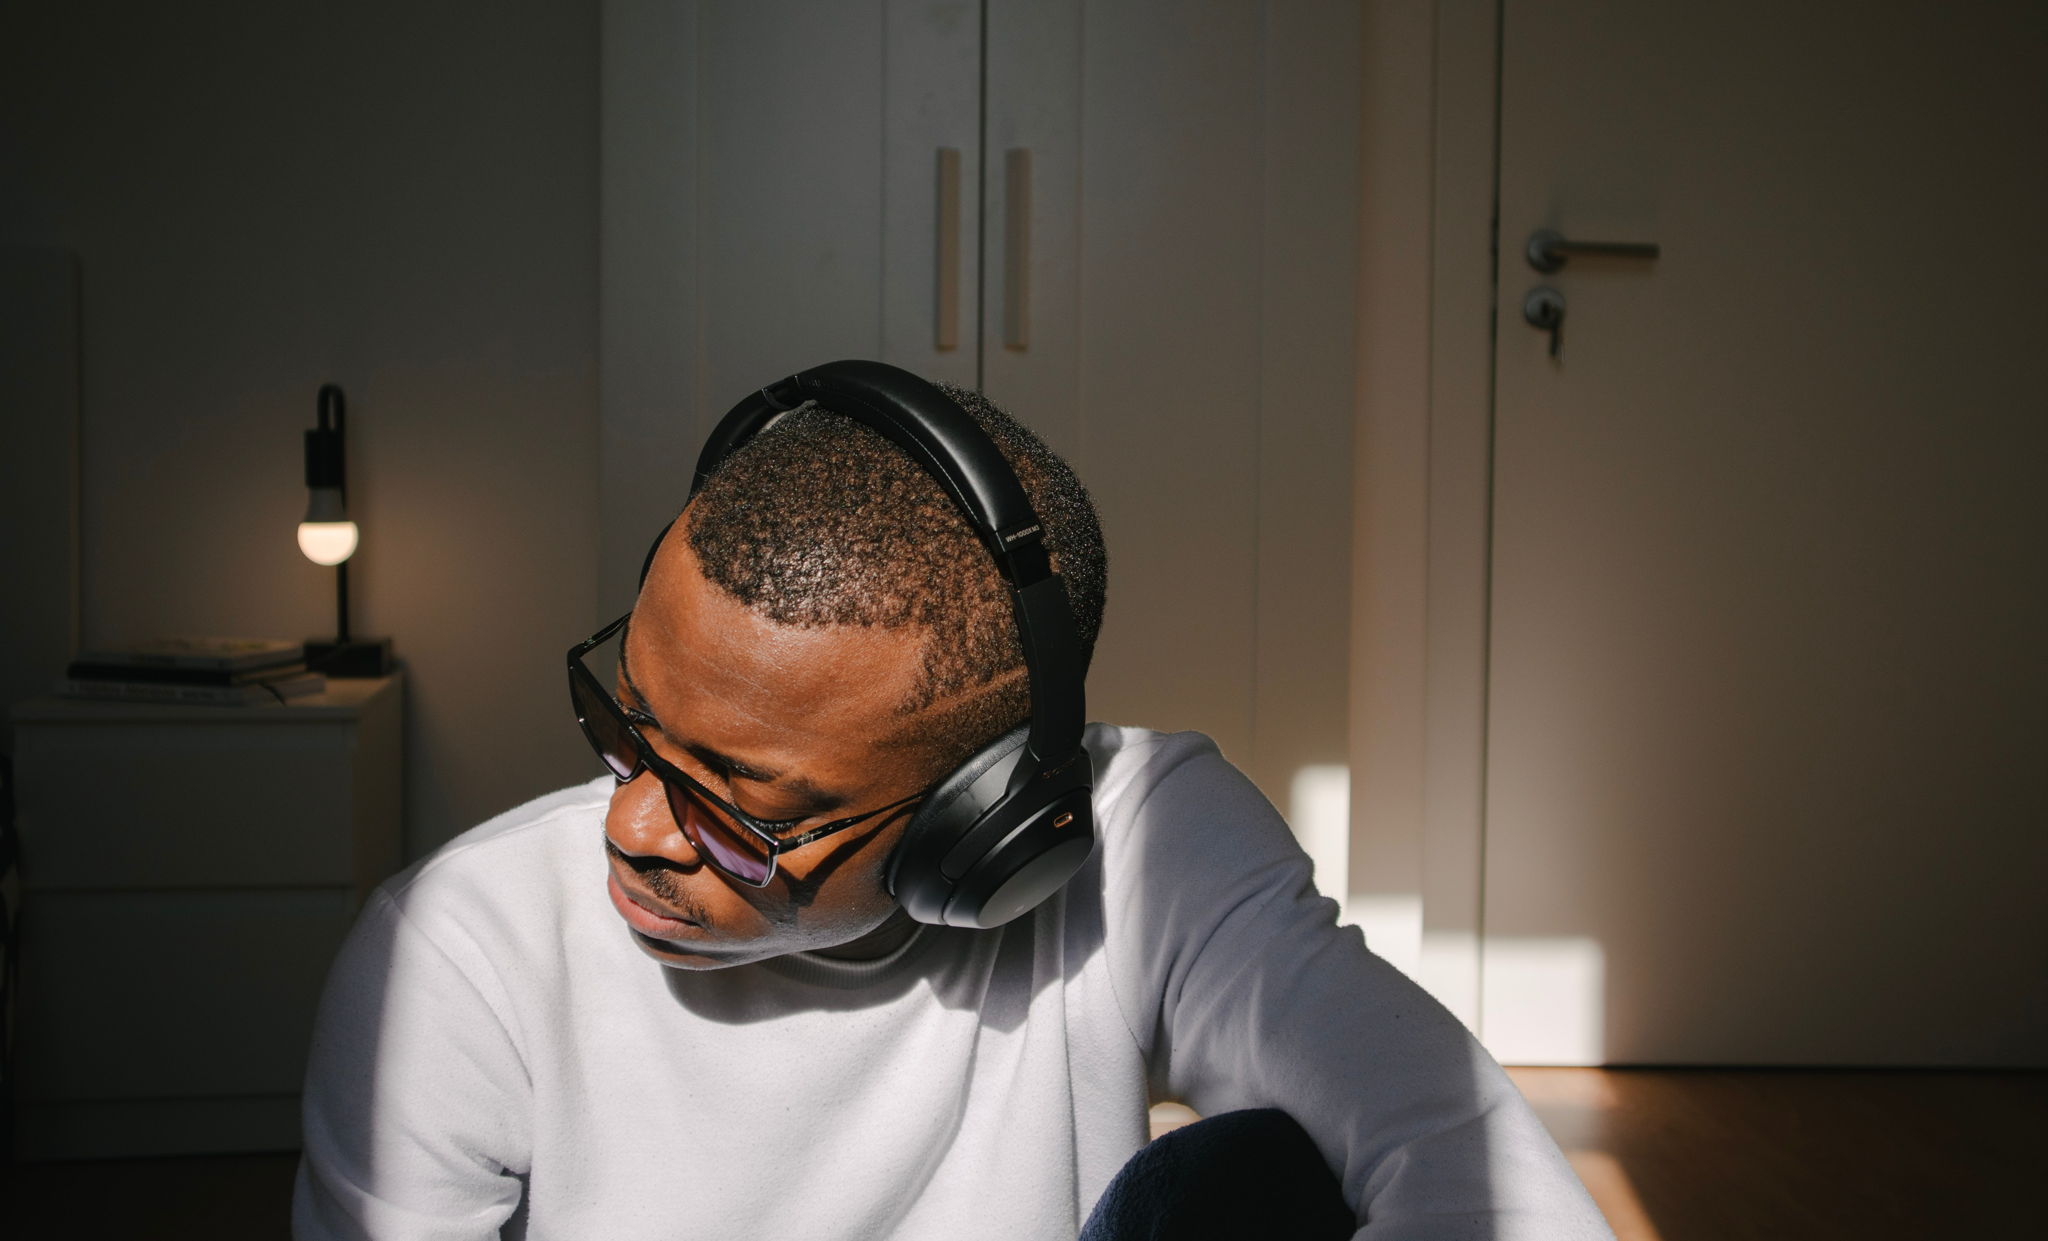 A black man wearing headphones and listening to music in his bedroom looks down and to the side. He is sitting by the window.